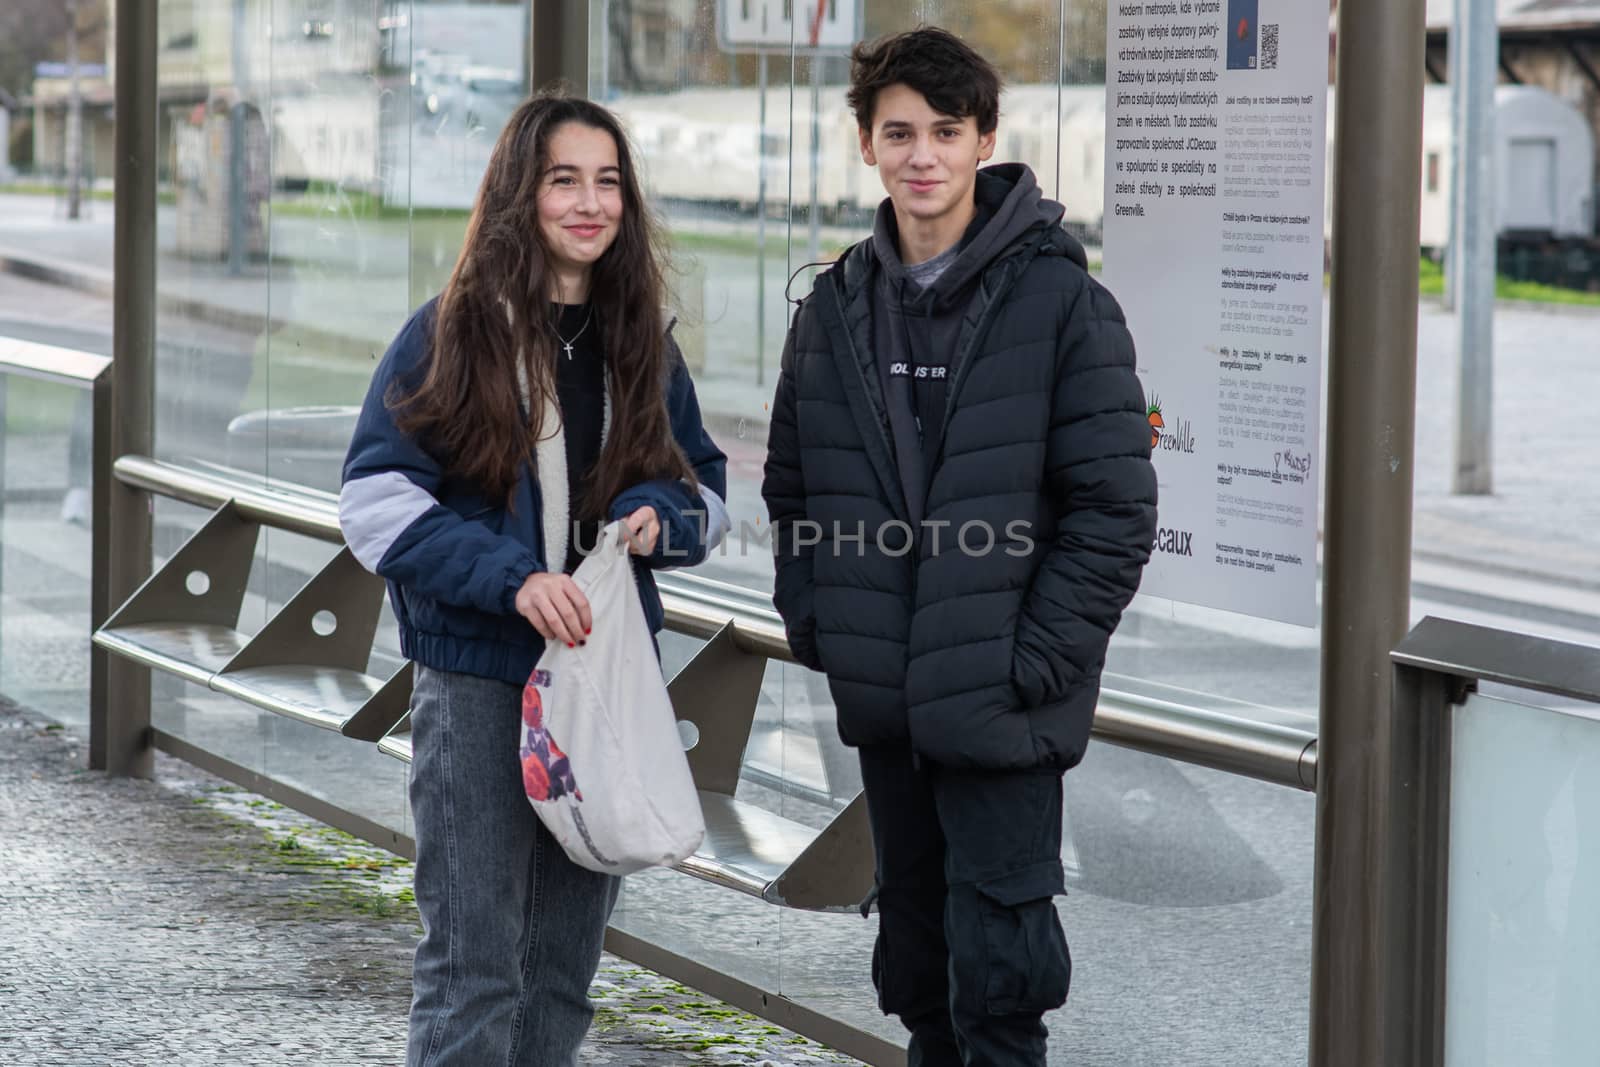 11/16/20. Czech Republic. A young couple are waiting for a tram at Hradcanska tram stop during quarantine. by gonzalobell